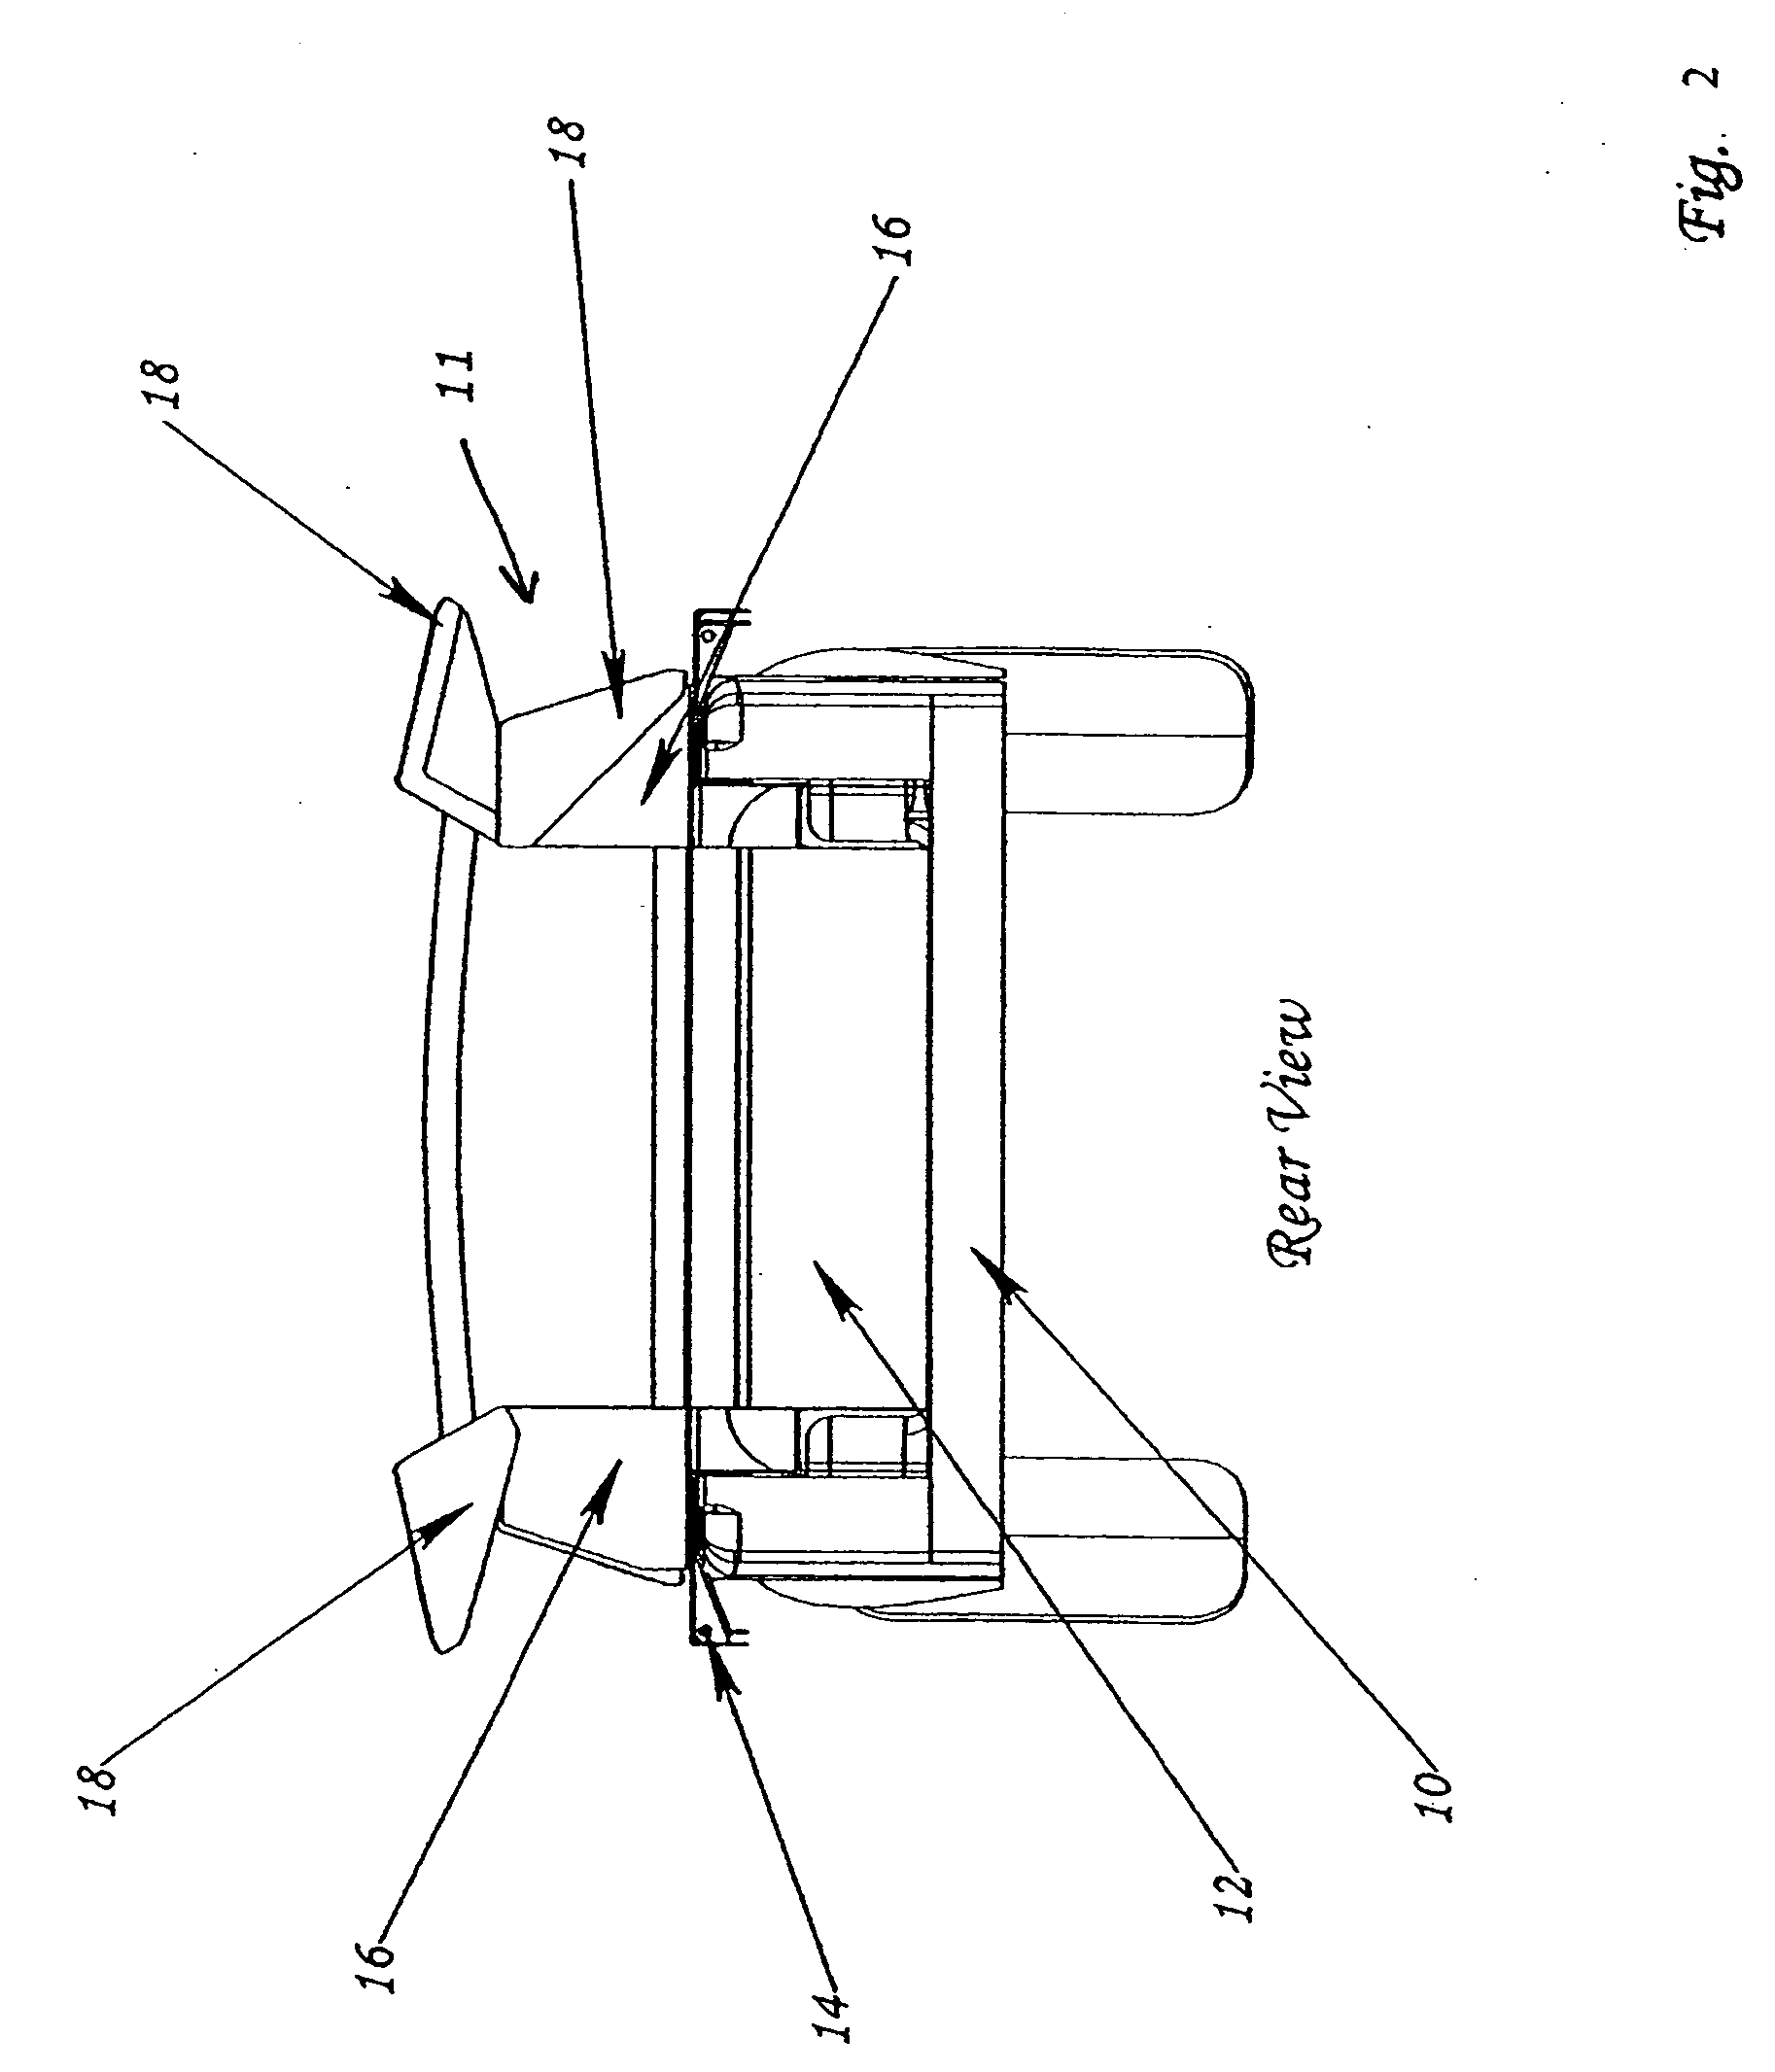 Toolbox latch and hinge apparatus and method